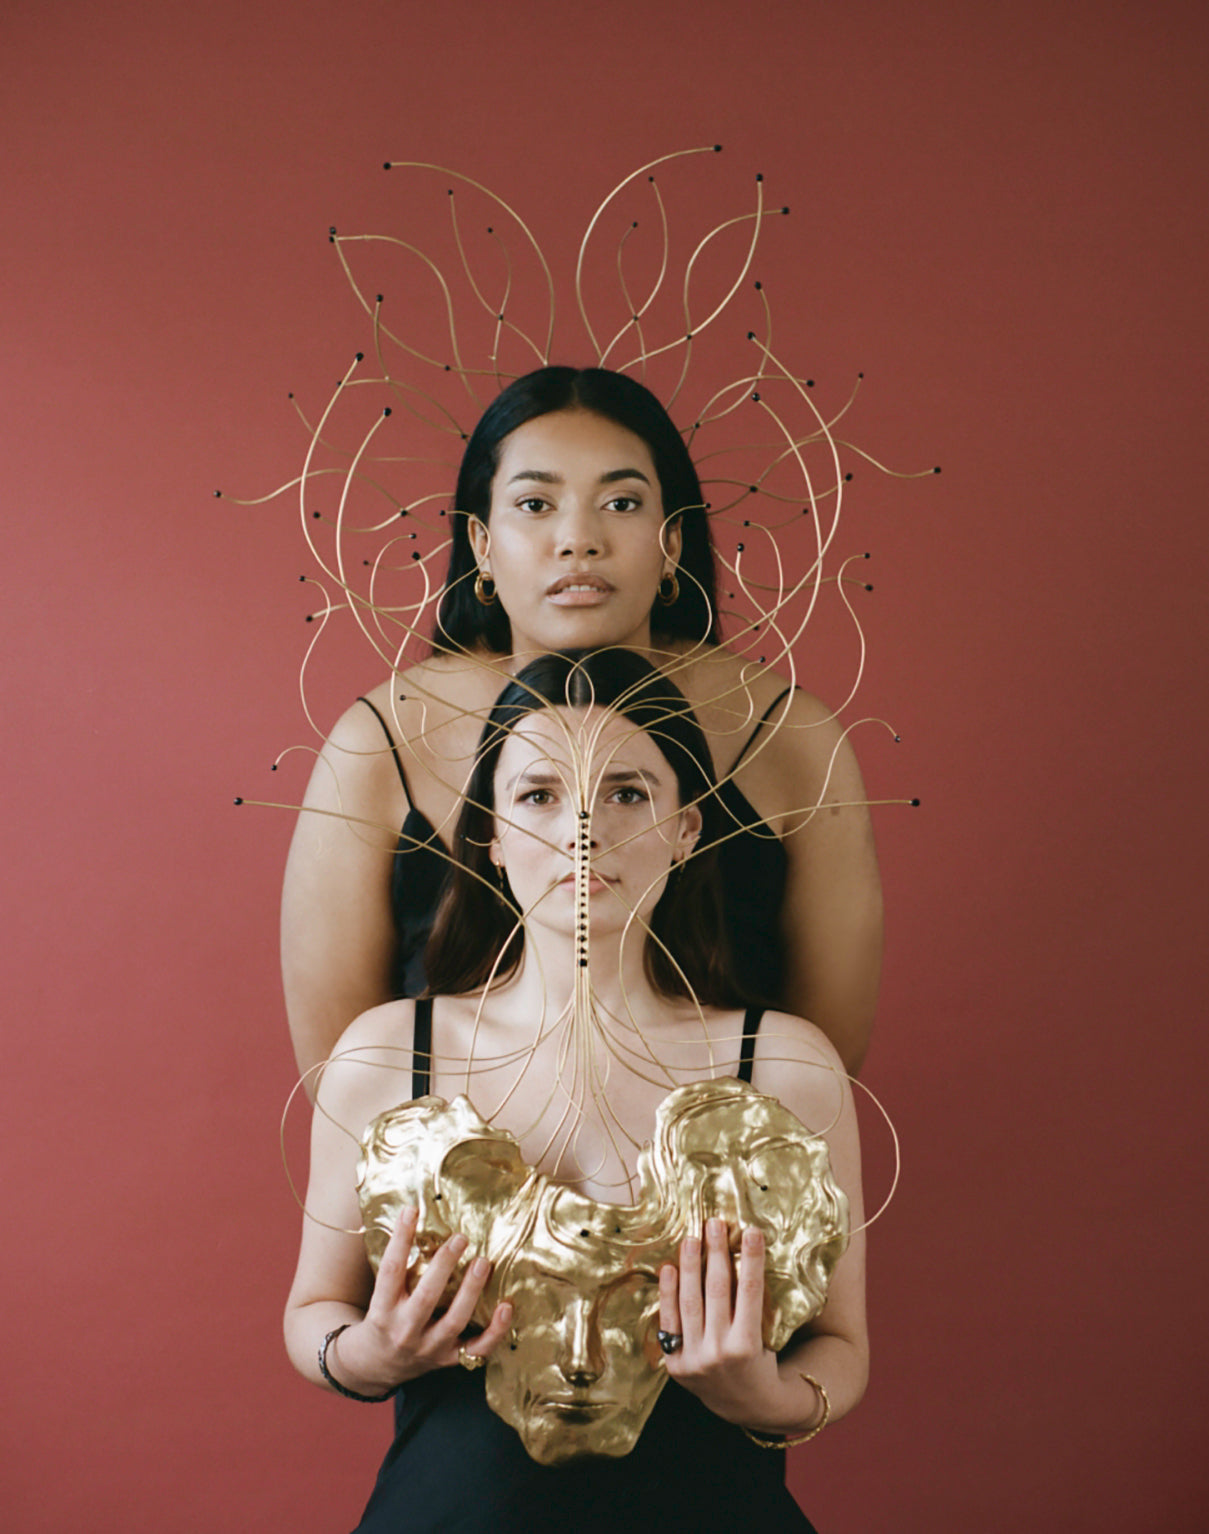 Models wearing symmetrical designed headpieces and jewellery